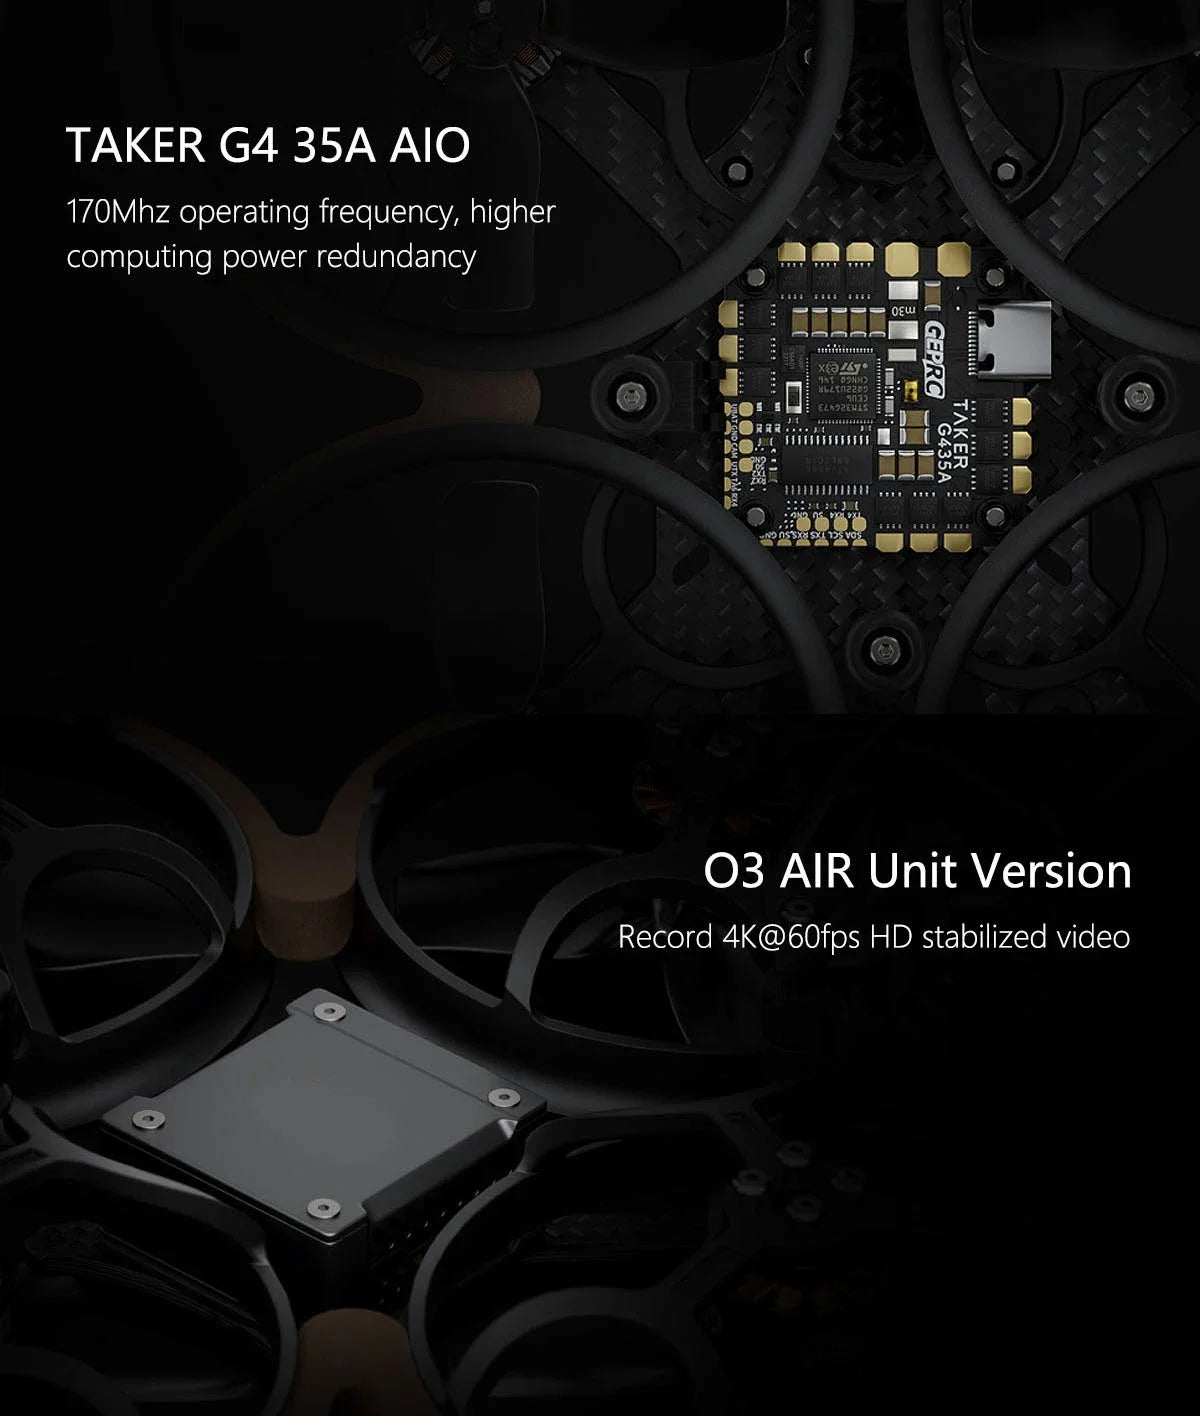 GEPRC Cinelog25 V2 HD Wasp FPV, TAKER G4 35A AIO 17OMhz operating frequency, higher computing power